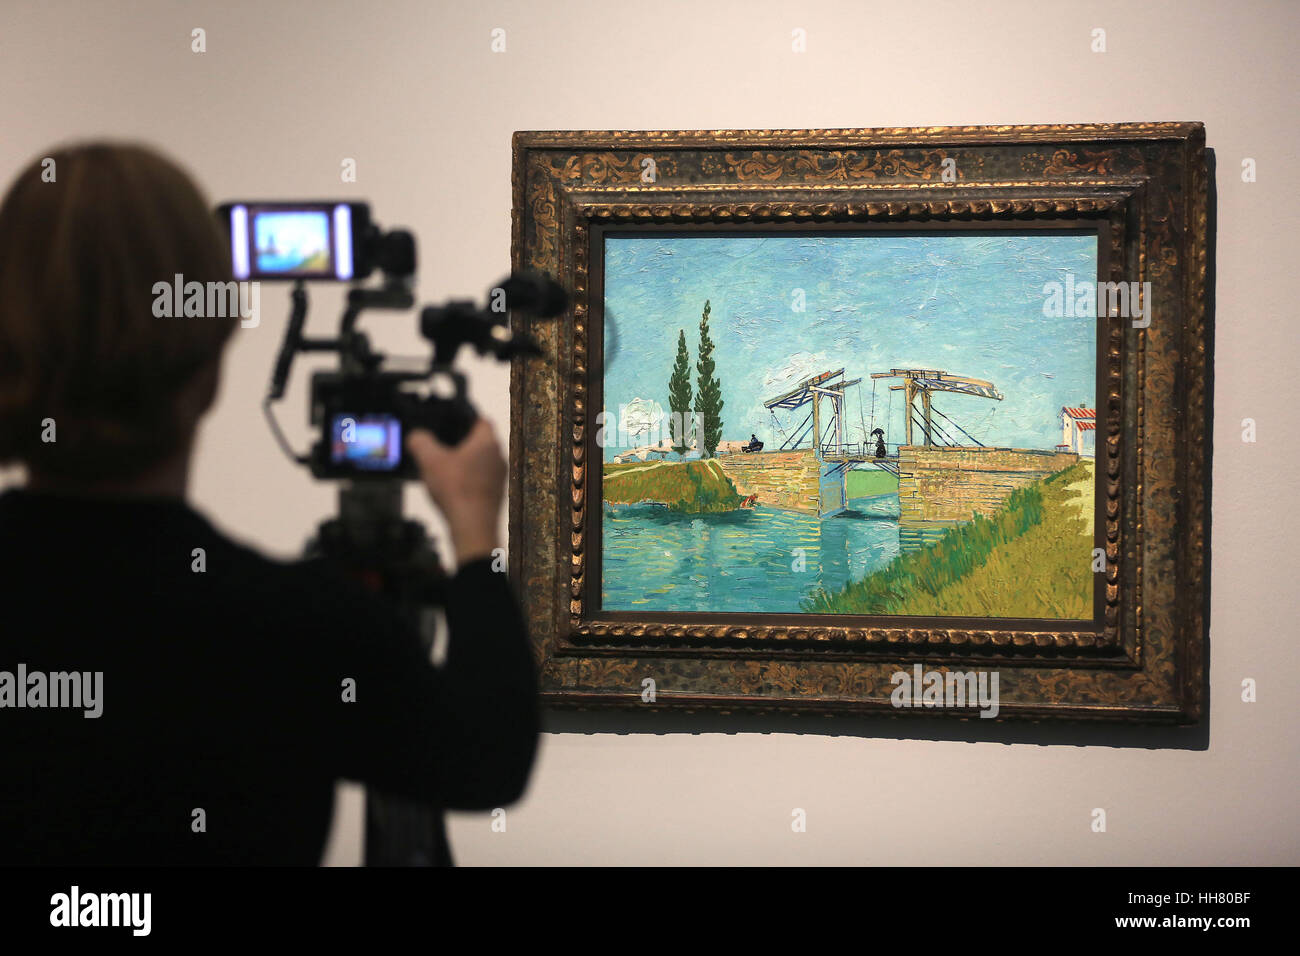 Cologne, Germany. 22nd Sep, 2016. ARCHIVE - An archival image shows a man filming the Dutch expressionist painter Vincent Van Gogh's 'The Railway Bridge' in Cologne, Germany, 22 September 2016. The Wallraf Richartz Museum in Cologne has decided to extend its 'From Duerer to van Gogh' exhibition by two weeks to the 12.02.17 due to its great popularity. Photo: Oliver Berg/dpa/Alamy Live News Stock Photo